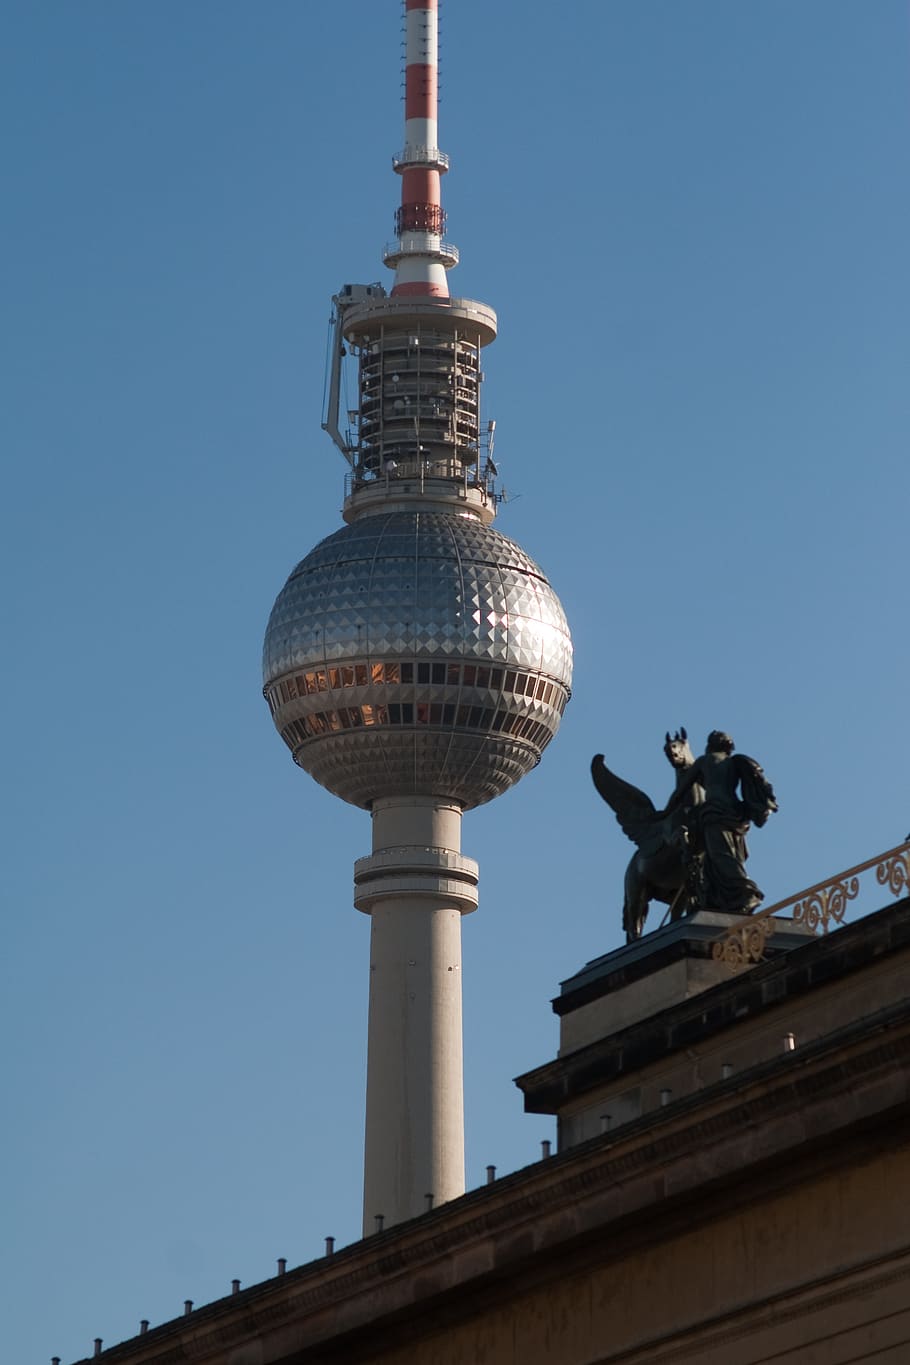 hotels in berlin, germany, tv tower, nearby, statue, architecture